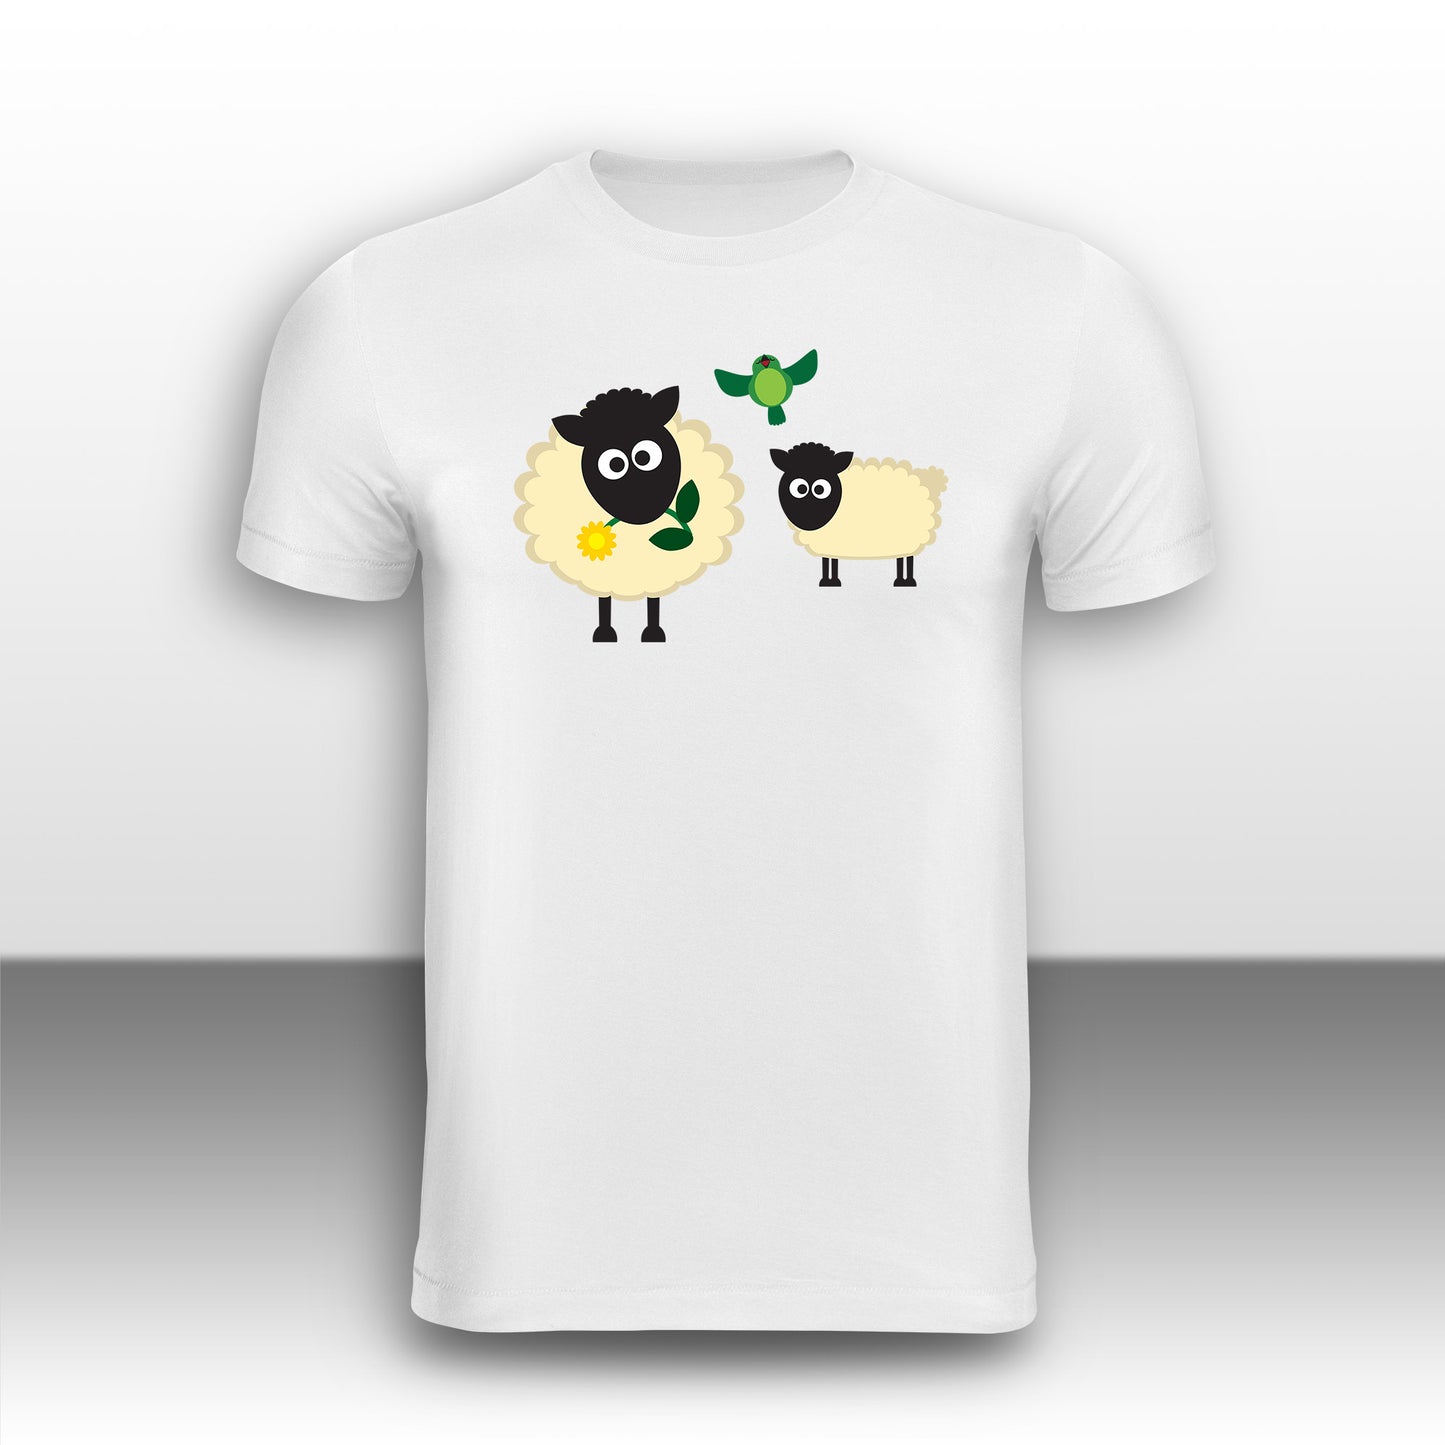 Happy Sheep Adult T-Shirt from the Farm Yard Collection